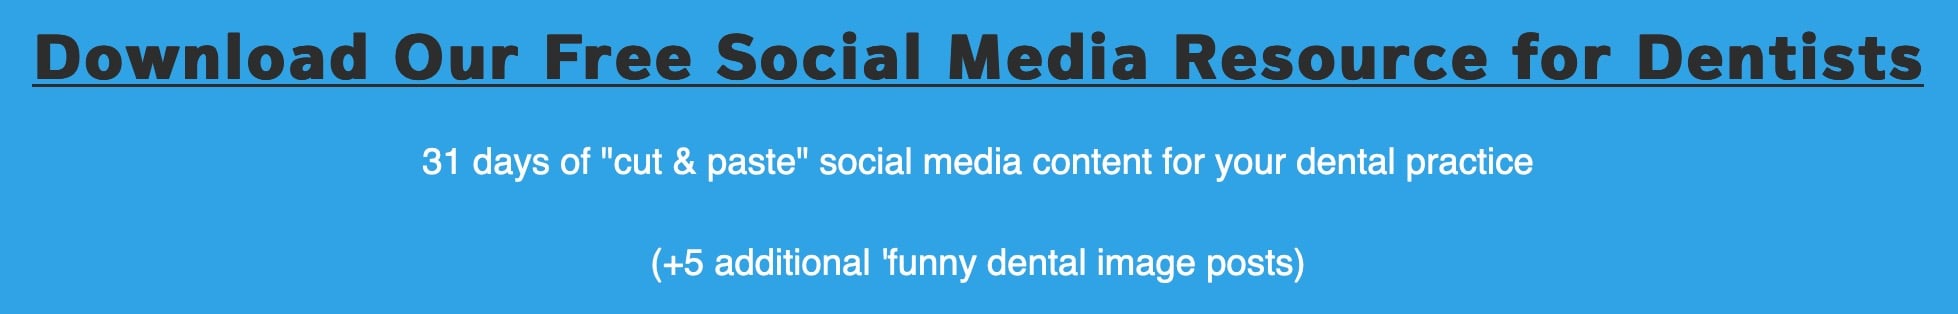 Social Media For Dentists Templates and Resources